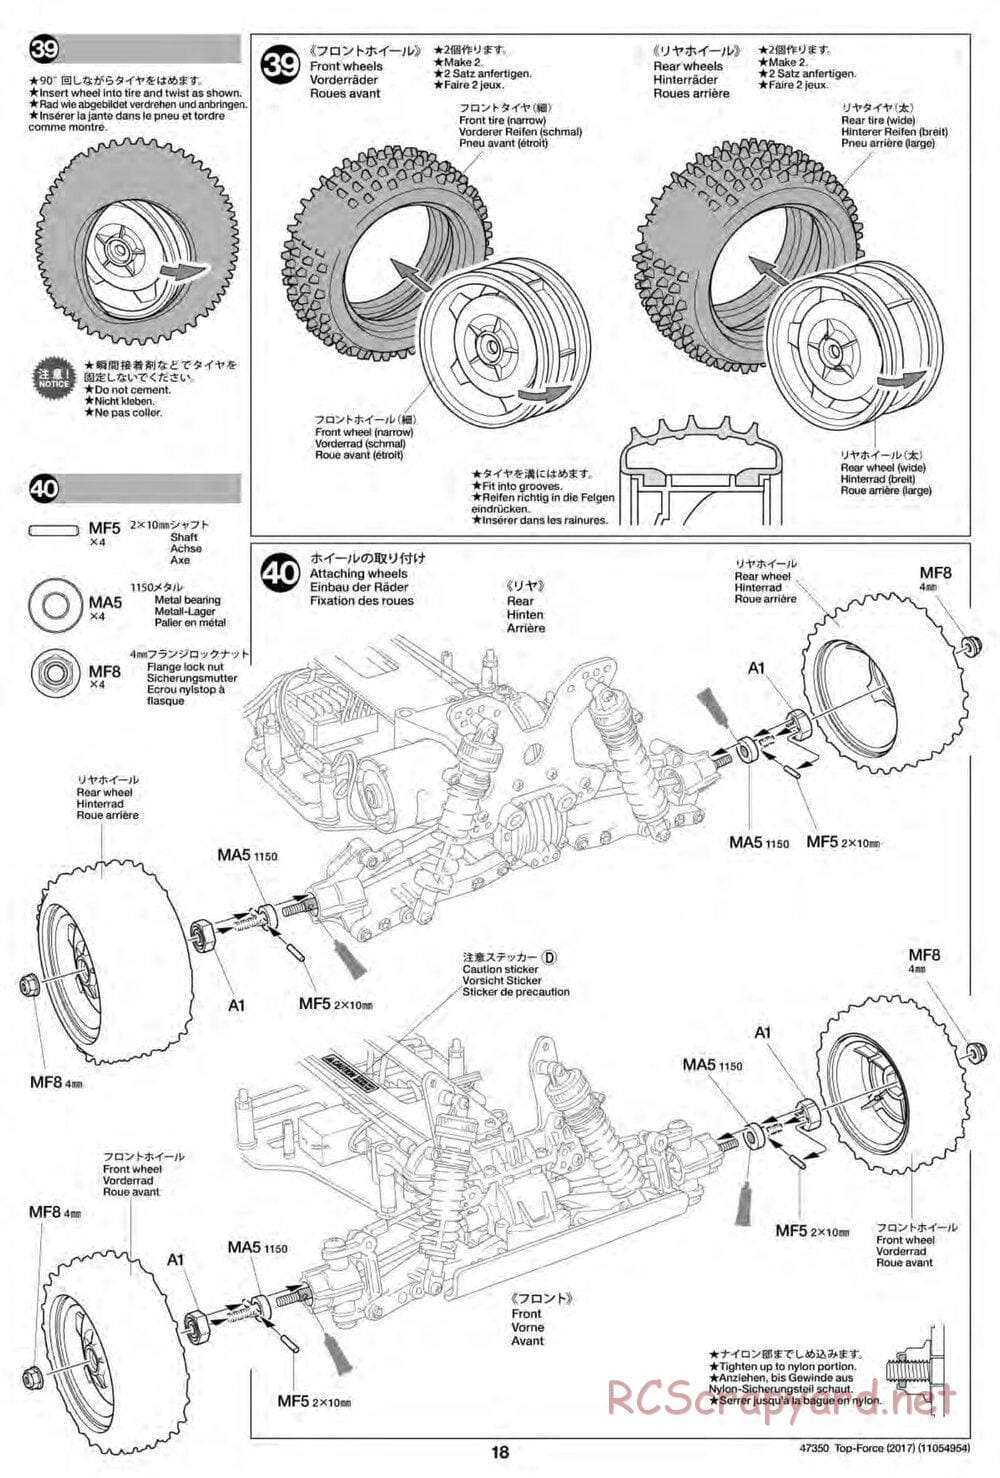 Tamiya - Top Force 2017 - DF-01 Chassis - Manual - Page 18